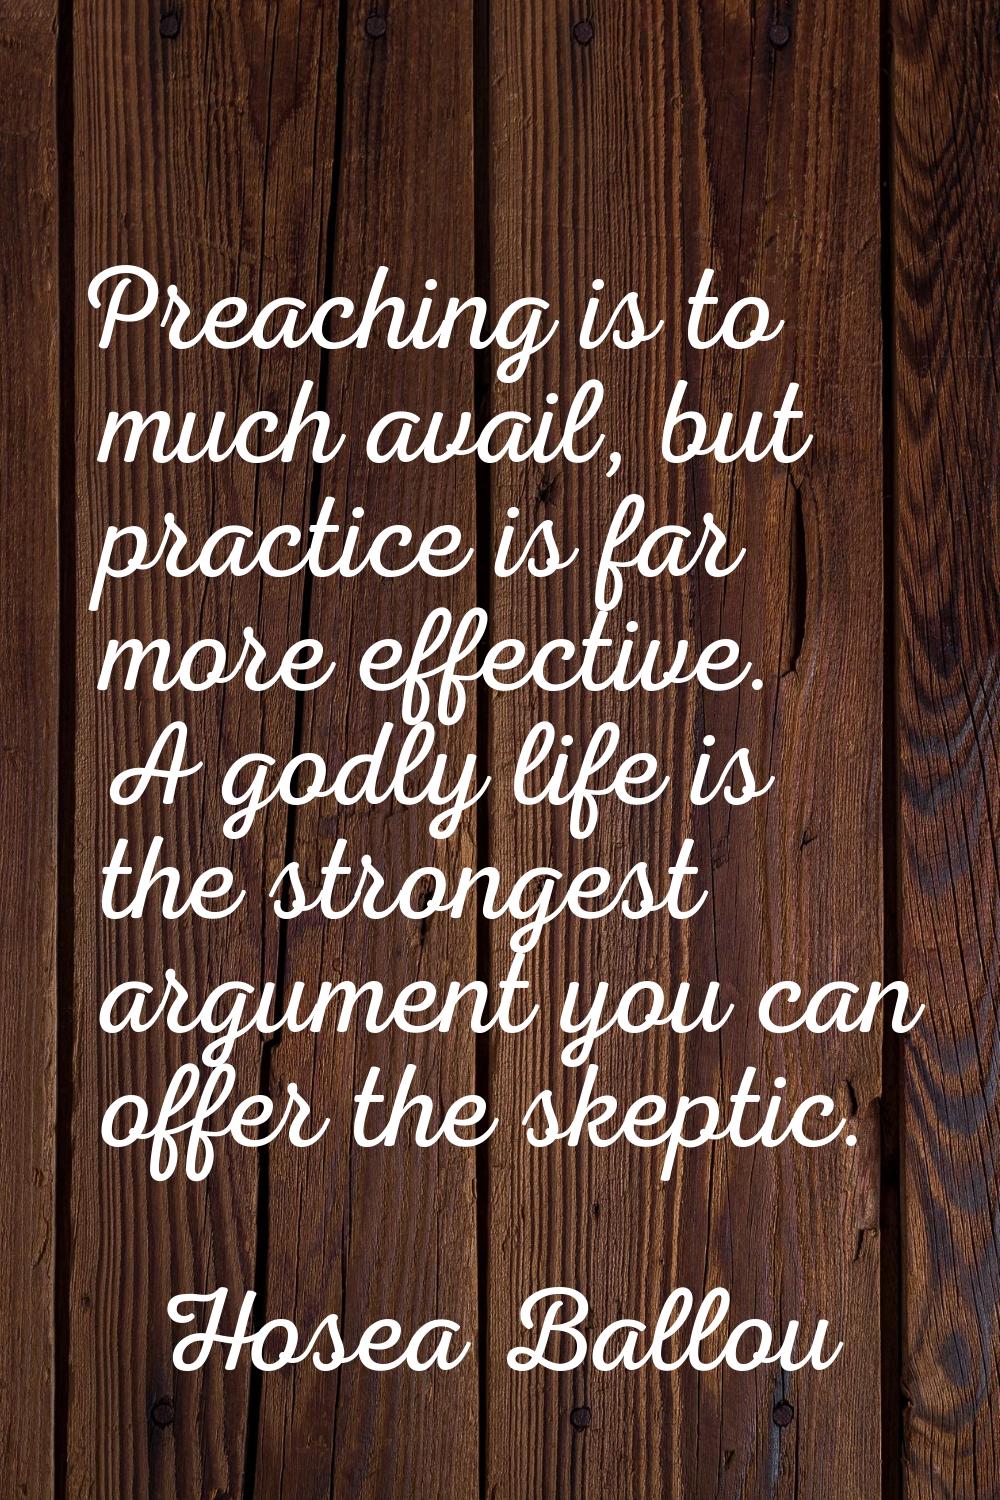 Preaching is to much avail, but practice is far more effective. A godly life is the strongest argum